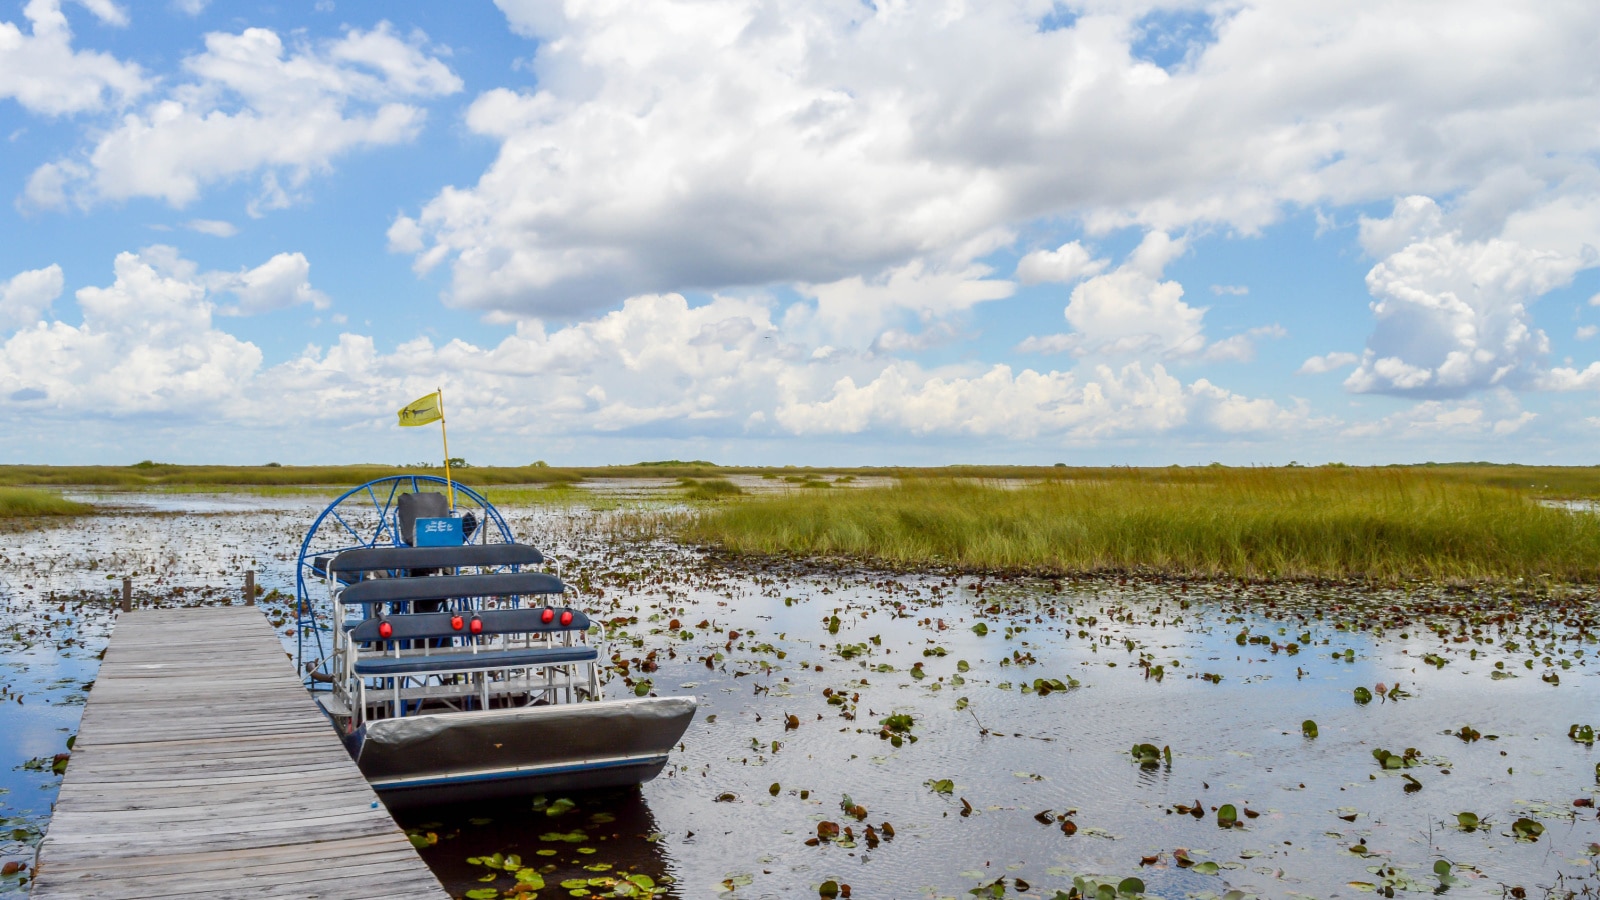 A parking airboat at the Everglades